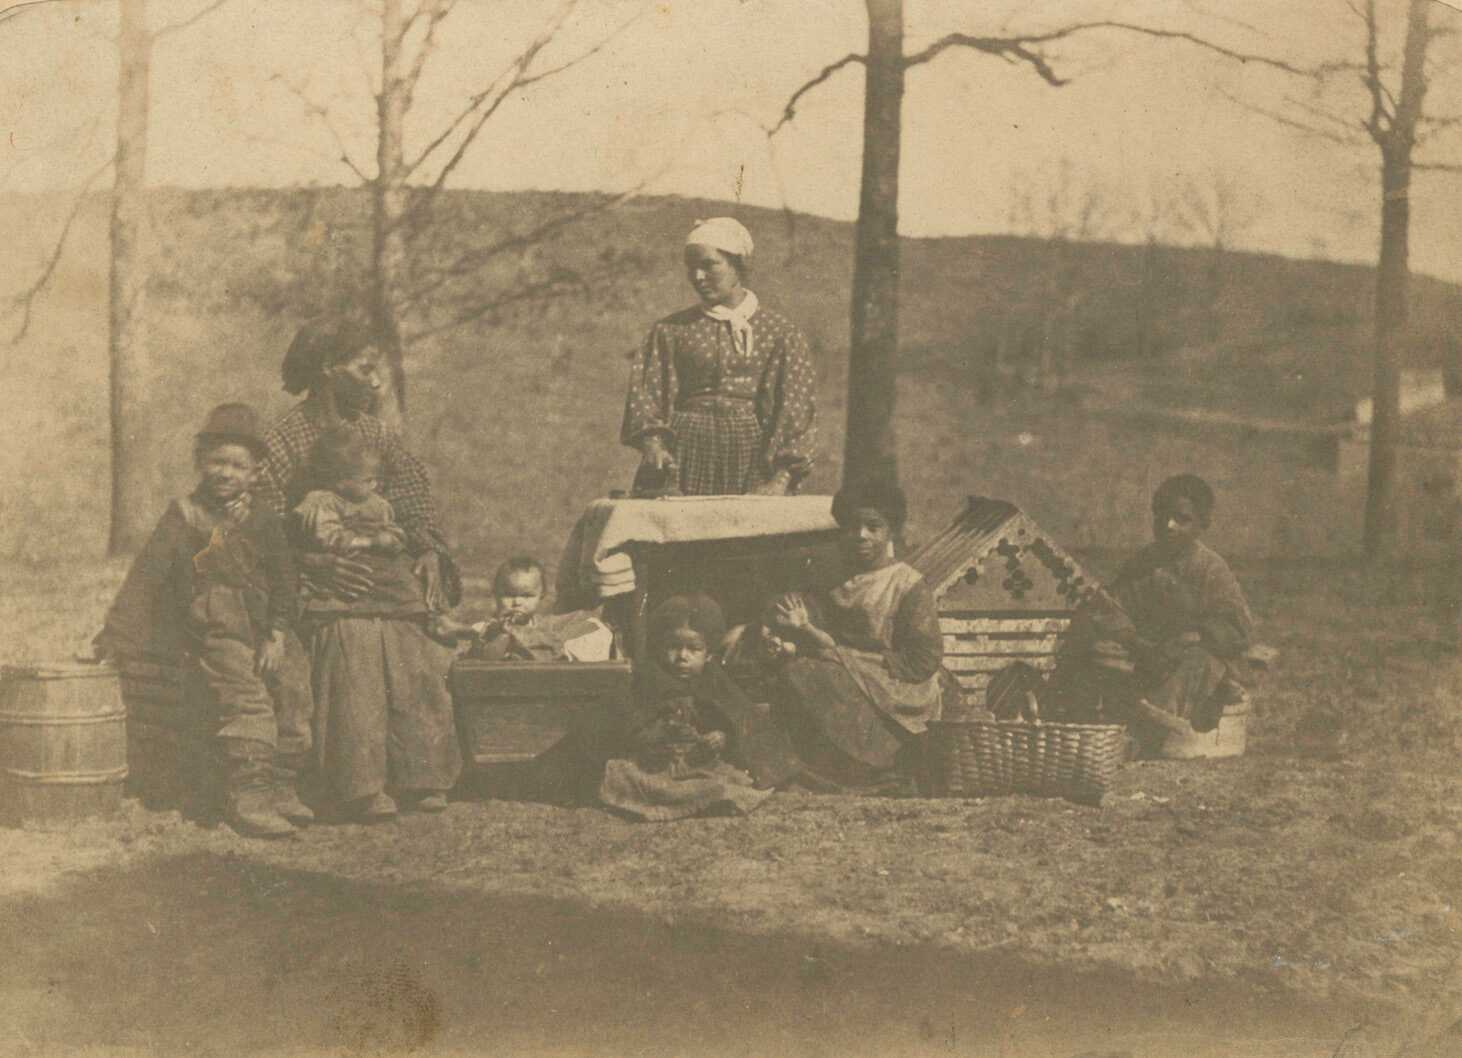 An albumen print on paper with a purple, reddish-brown hue depicting two adult women and seven children pictured, from left to right: William, Lucinda, Fannie (seated on Lucinda's lap), Mary (in cradle), Frances (standing), Martha, Julia (behind Martha), Harriet, and Charles or Marshall. Lucinda Hughes and Frances Hughes were sisters-in-law through Frances's husband David. The group is posed outside in front of bare trees, one woman is posed as if ironing. Baskets and a dog or doll house are placed around the group. The women and their children were enslaved at the time this photograph was taken on a plantation just west of Alexandria, Virginia, that belonged to Felix Richards. Frances and her children were enslaved by Felix, while Lucinda and her children were enslaved by his wife, Amelia Macrae Richards.

On the recto, an inscription is written in pencil on the paper mount below the image that reads: "Felix Richards slaves". On the verso, an inscription is written in pencil along the top center of the paper mount that reads "Felix Richards lived at 'Volusia' / Near Alexandria, VA." To the right of this inscription is more text written in pencil with a heavier hand that reads "101400 / 01-P-284". There is a pre-printed metallic oval on the verso.